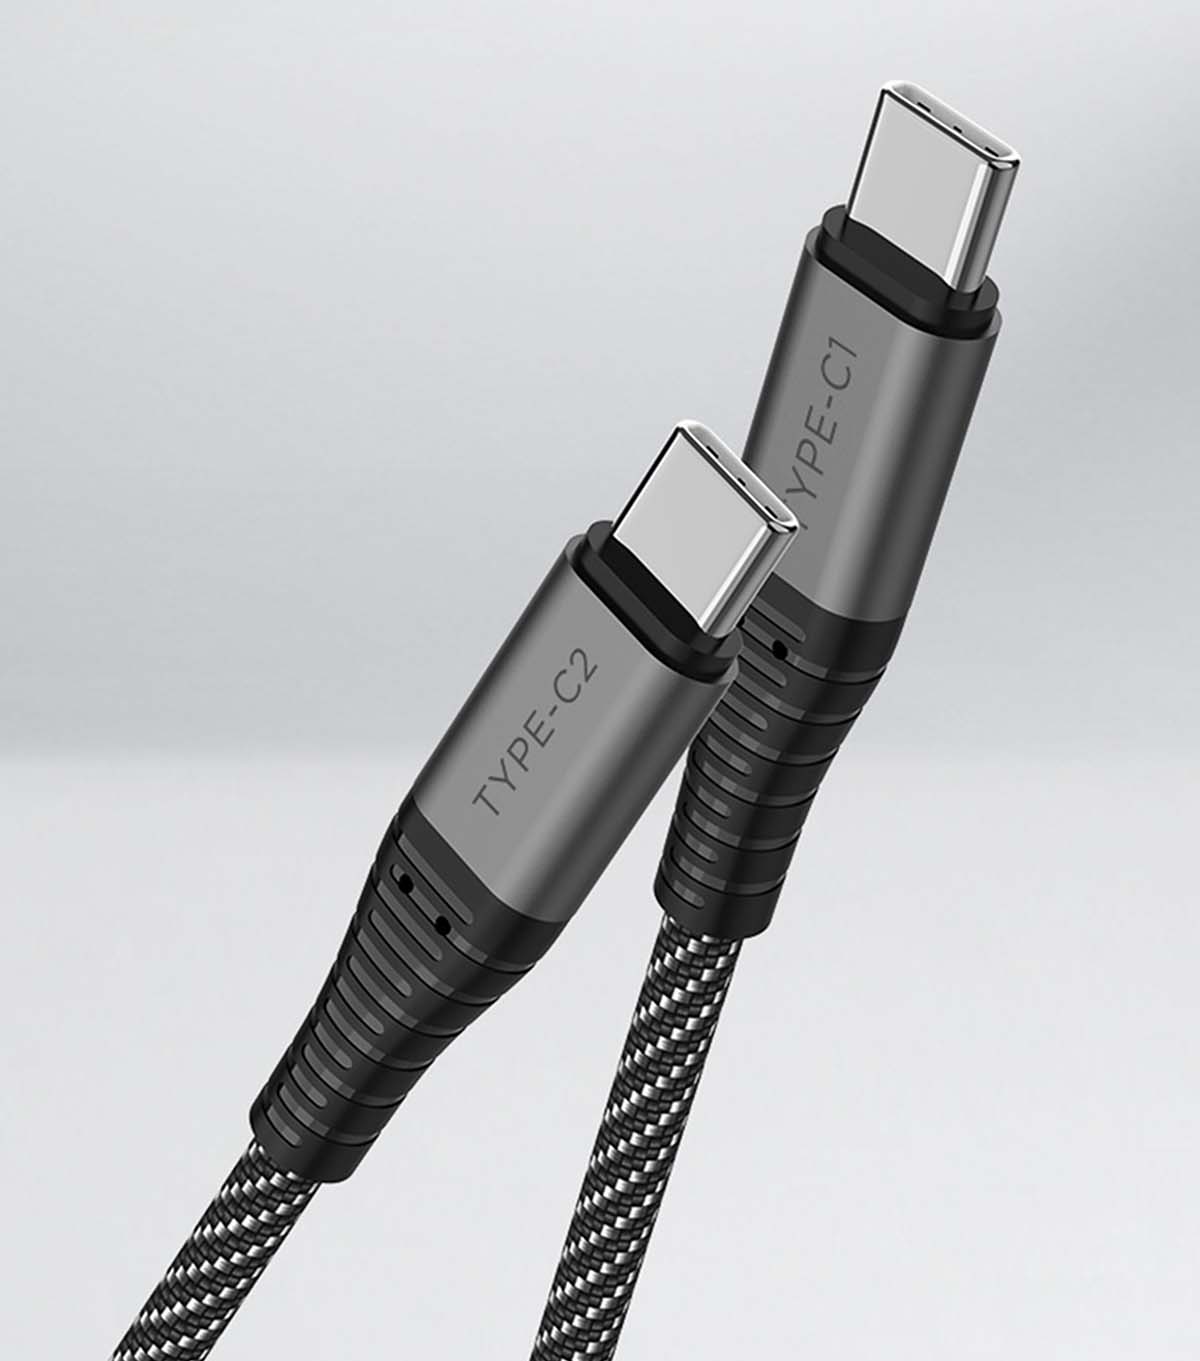 Nubia Type C to 2 Type C 100W Super Fast Charge 2-in-1 Data Cable